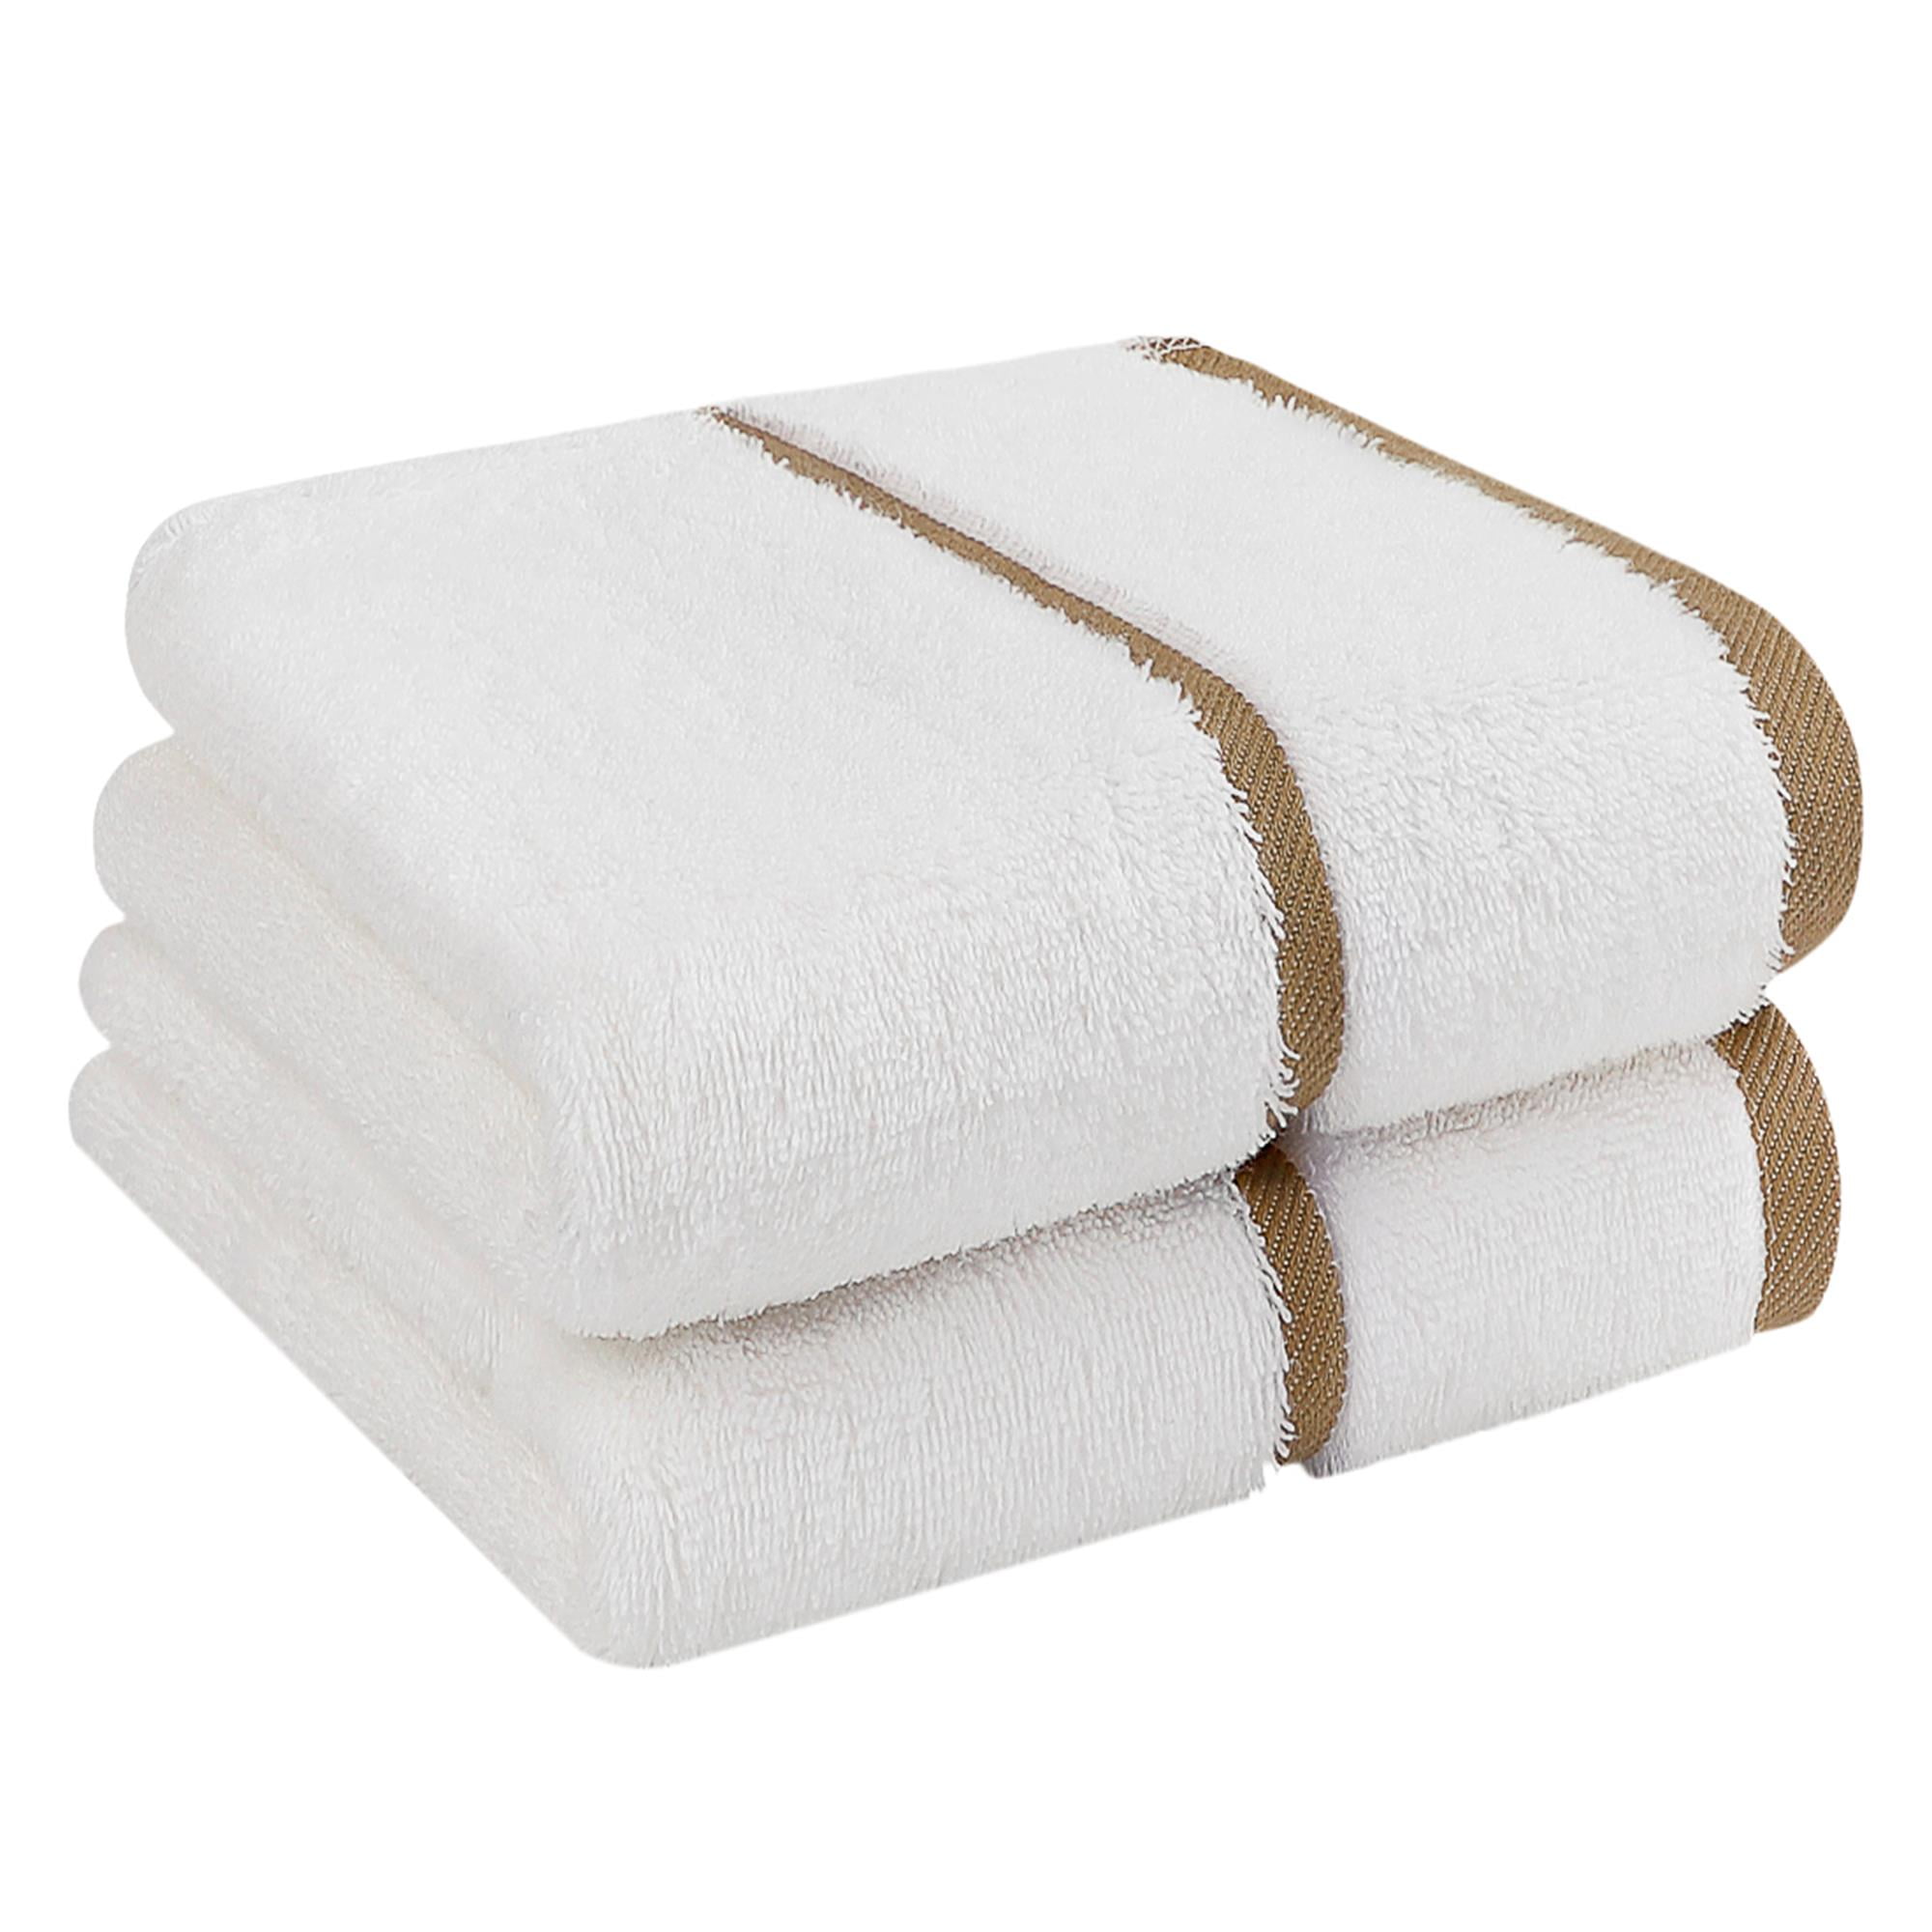 Royalz Collection Luxurious White Hand Towels for Bathroom 6 Pack 600 GSM  100% Ring Spun Cotton - 16x30 Extra Large, Soft & Absorbent Cotton Hand